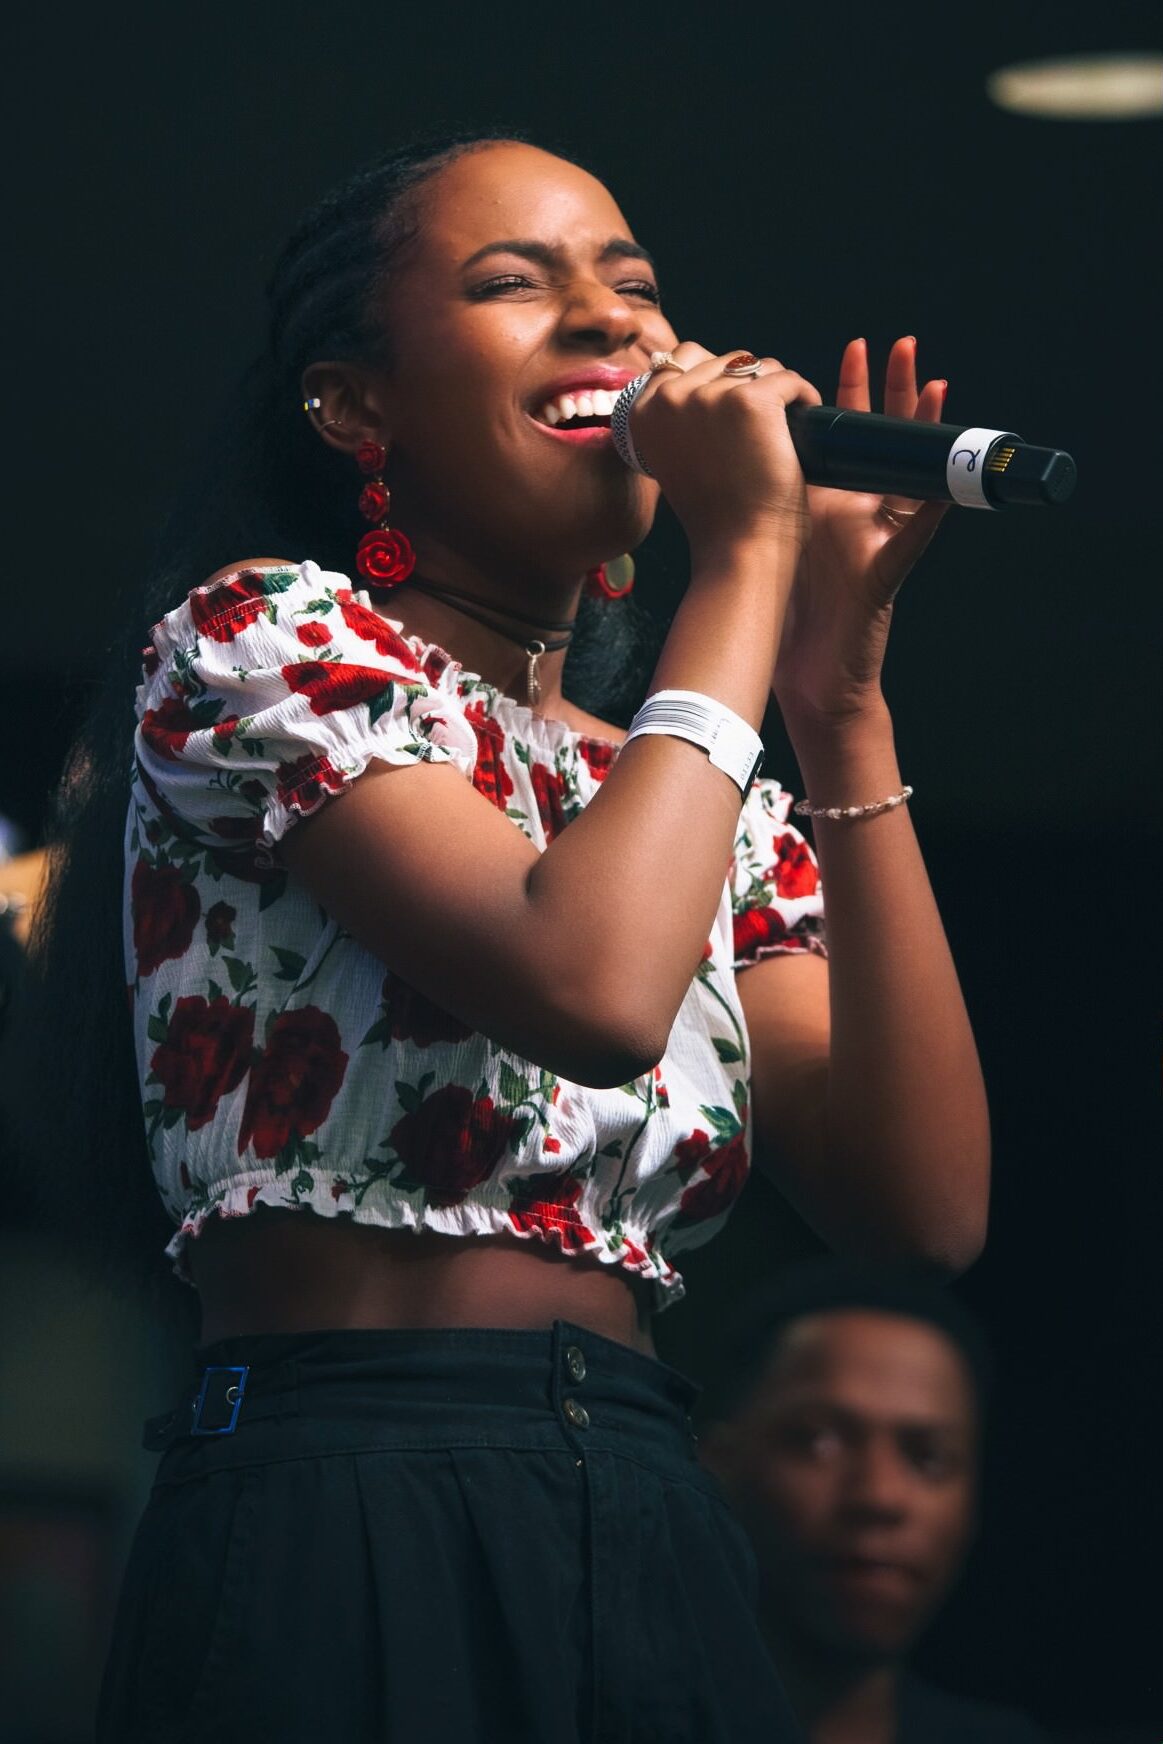 A pop singer performs on stage.